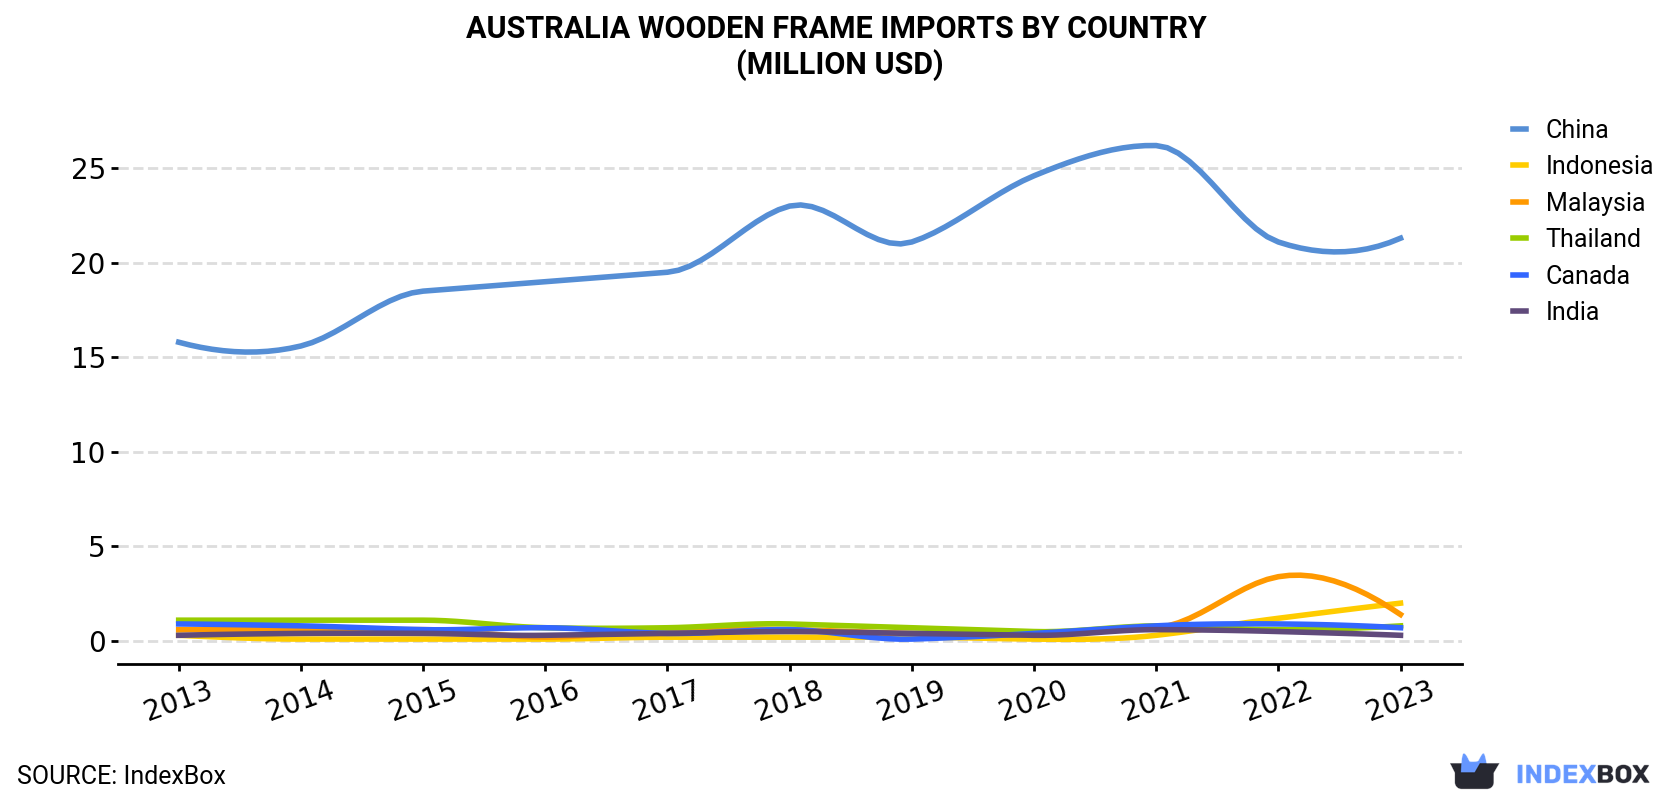 Australia Wooden Frame Imports By Country (Million USD)